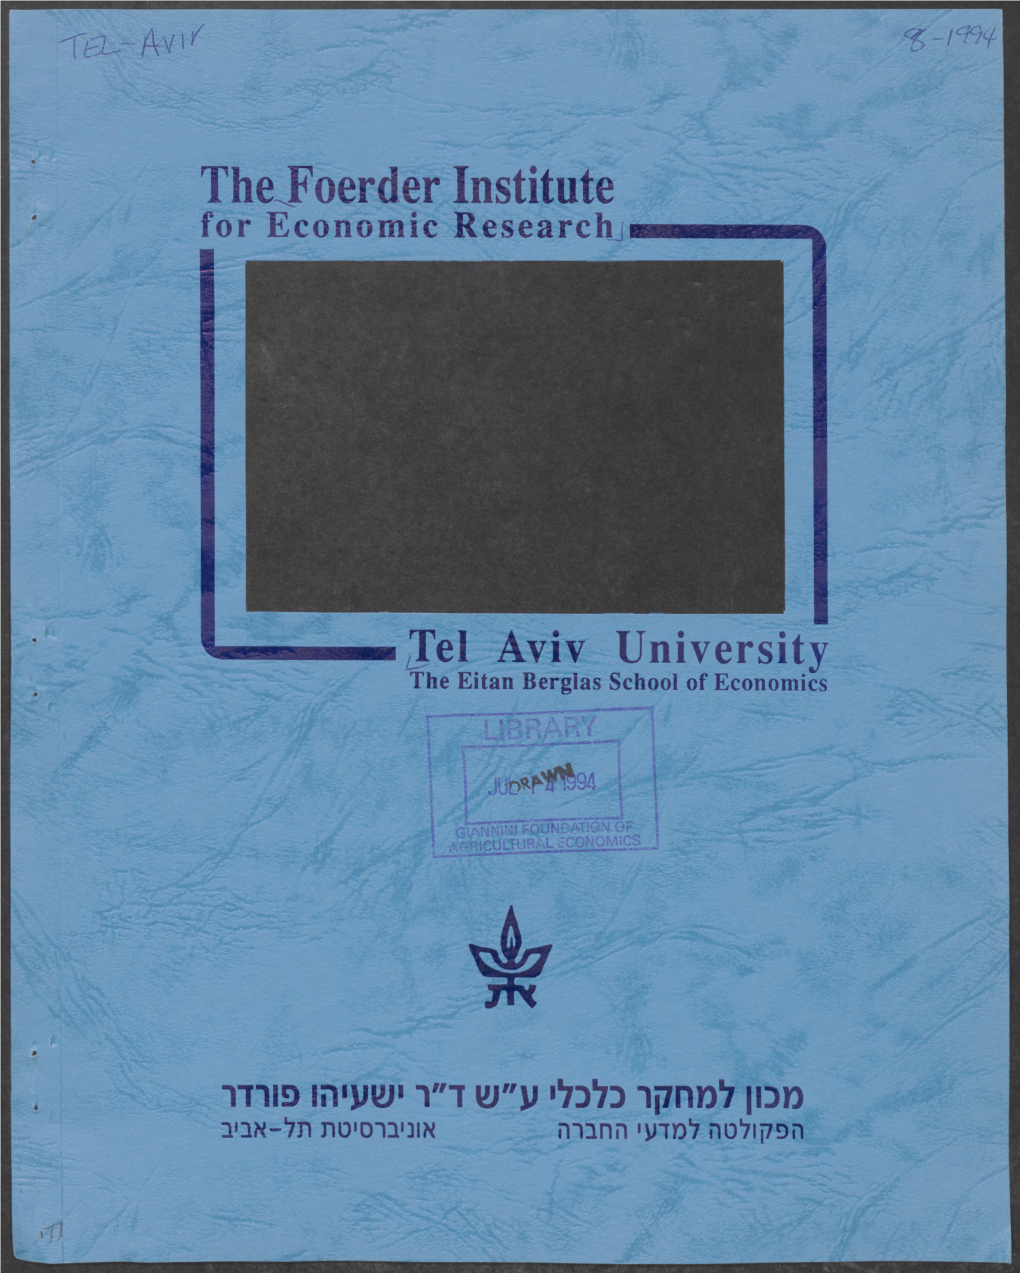 The Foerder Institute for Economic Research